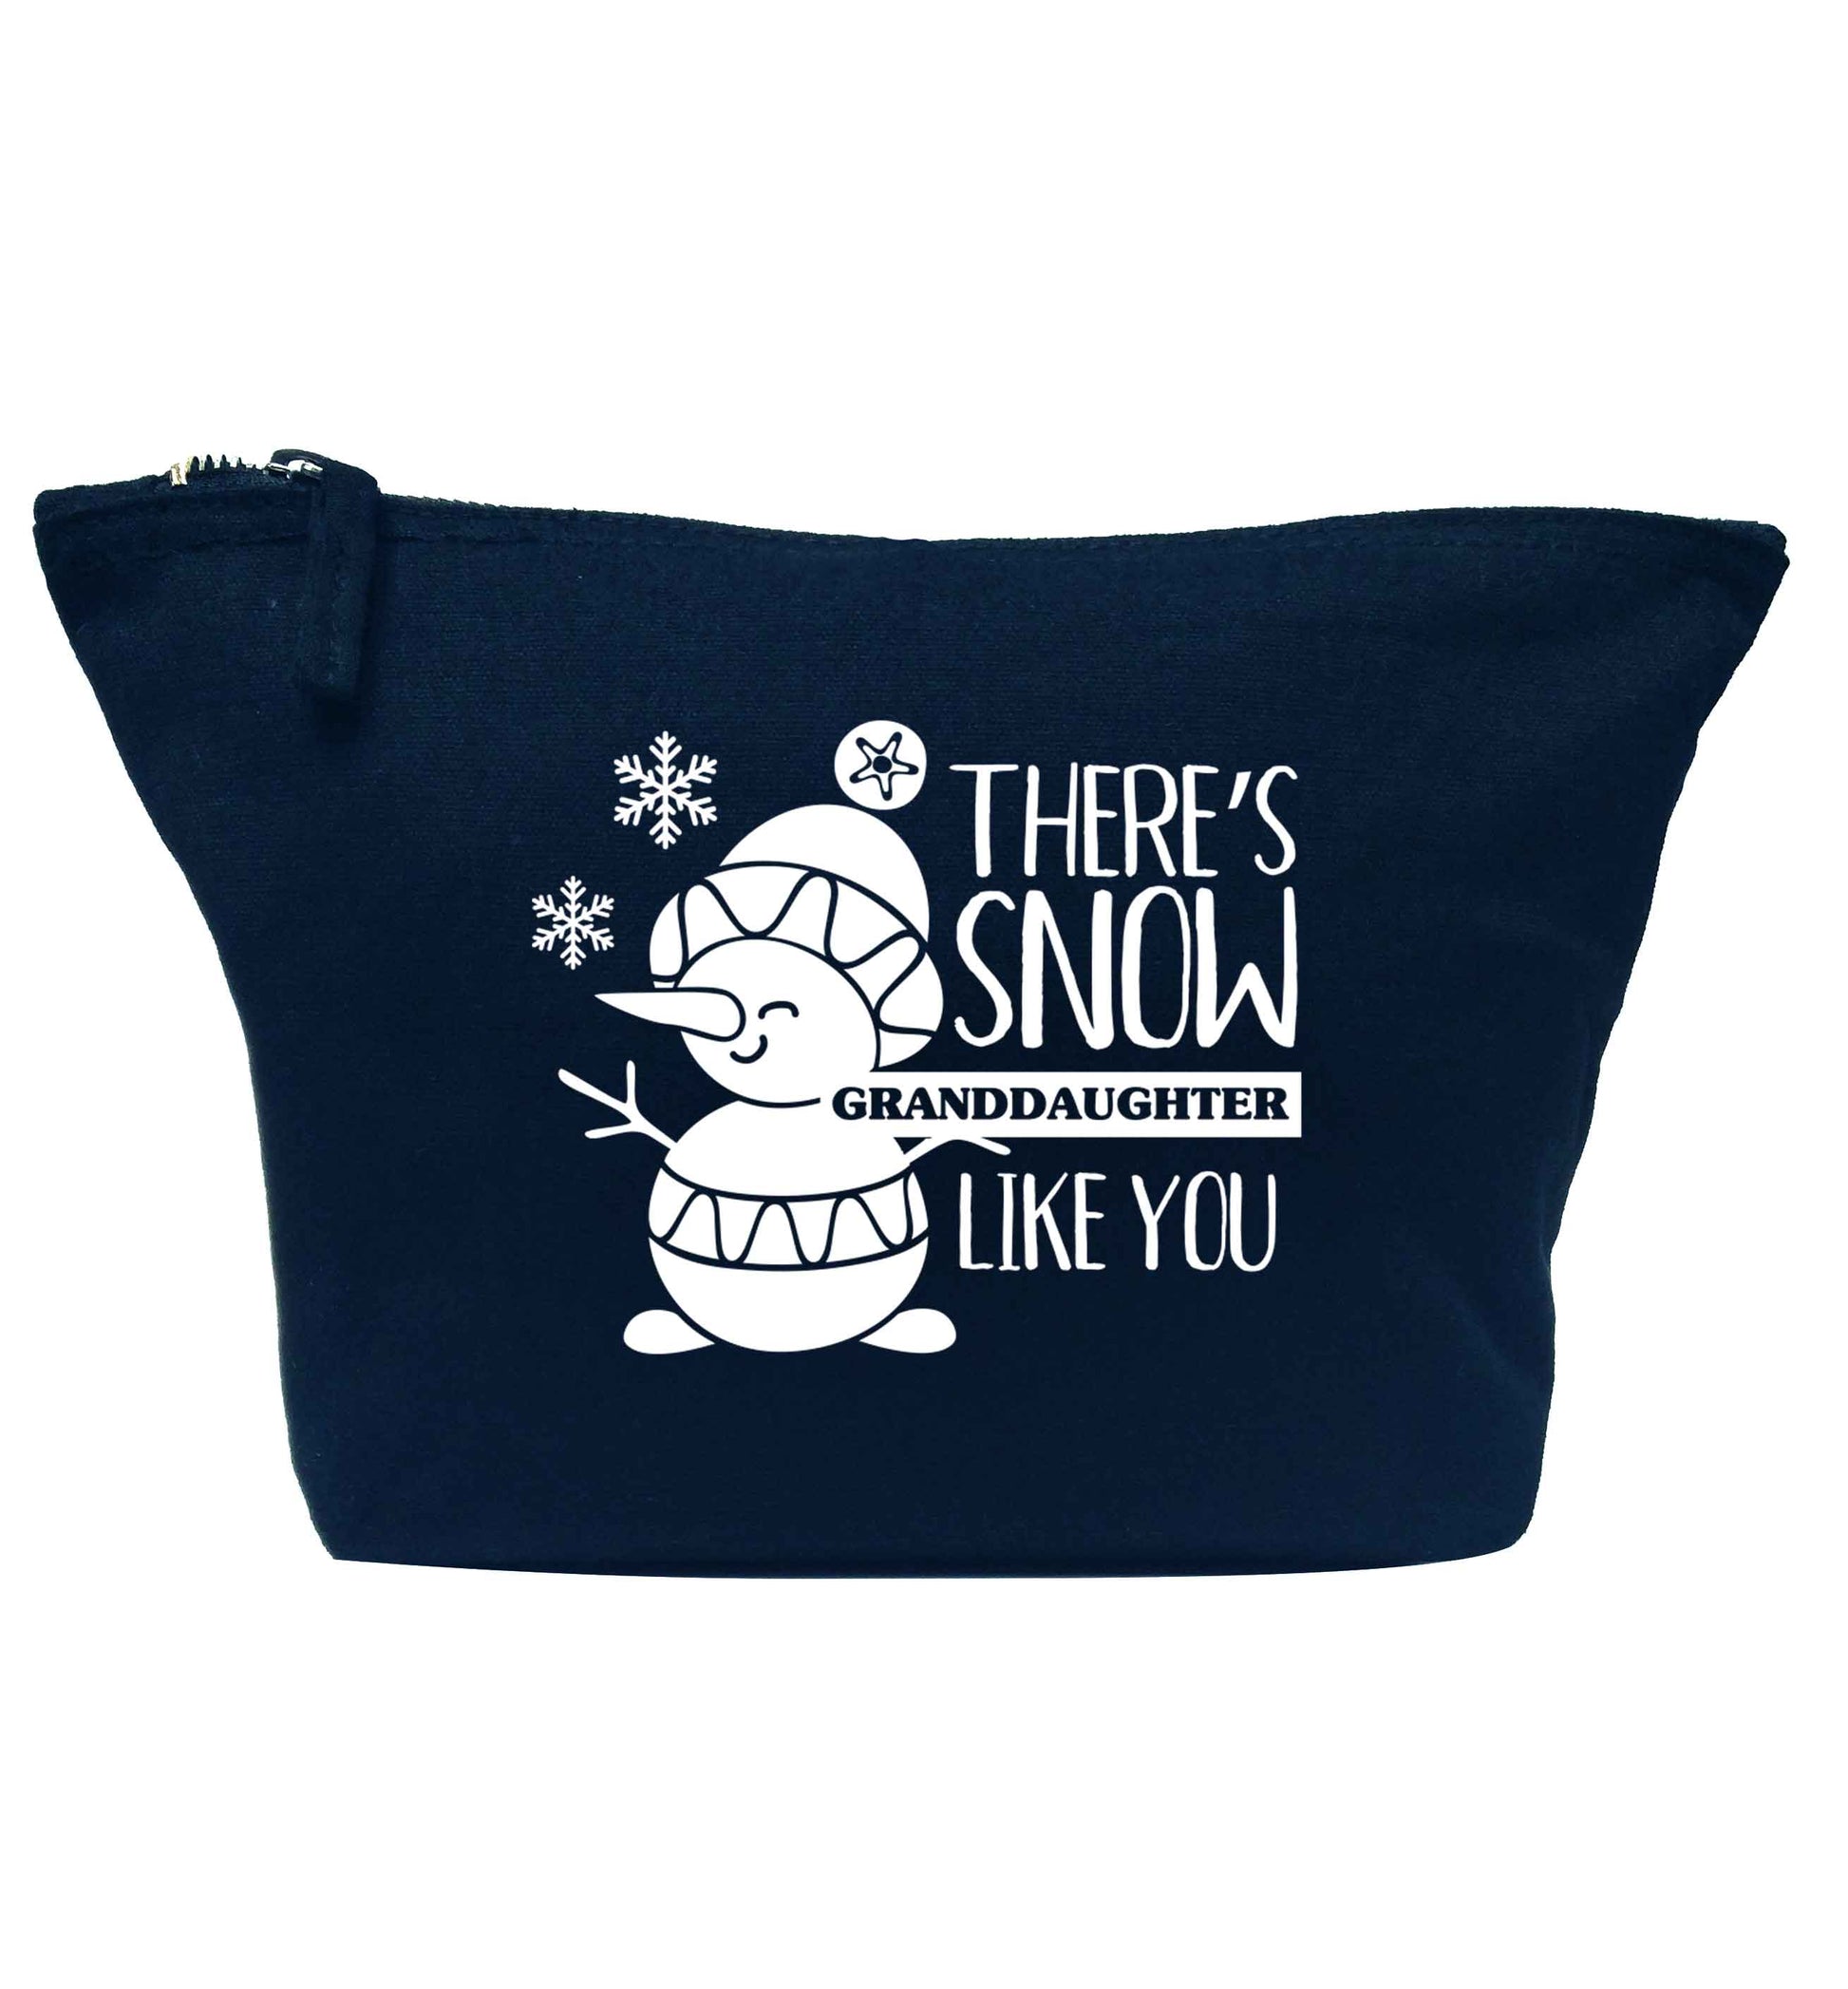 There's snow granddaughter like you navy makeup bag